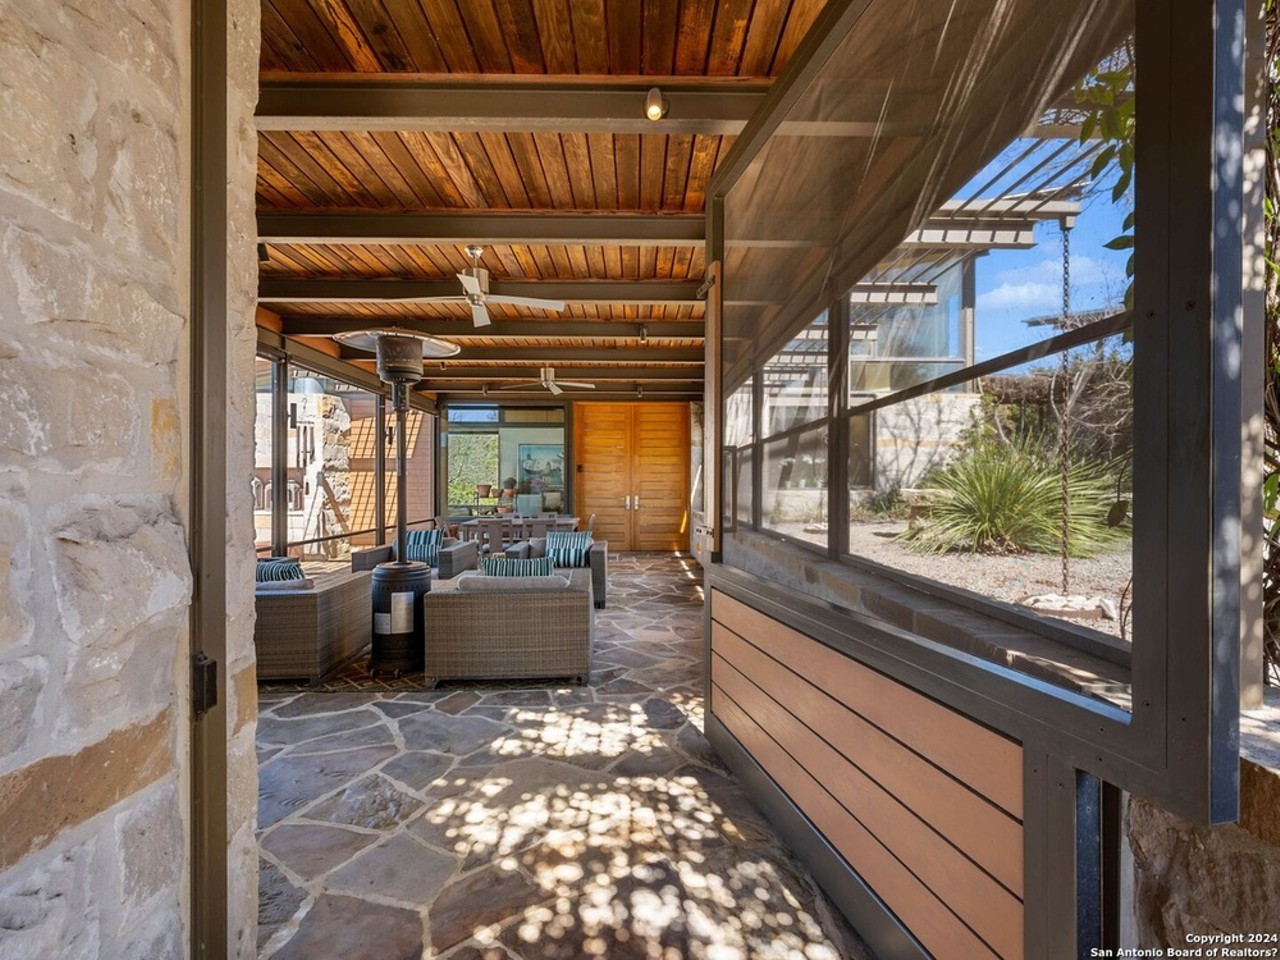 This eco-friendly San Antonio home for sale was designed by the AT&T Center's architects